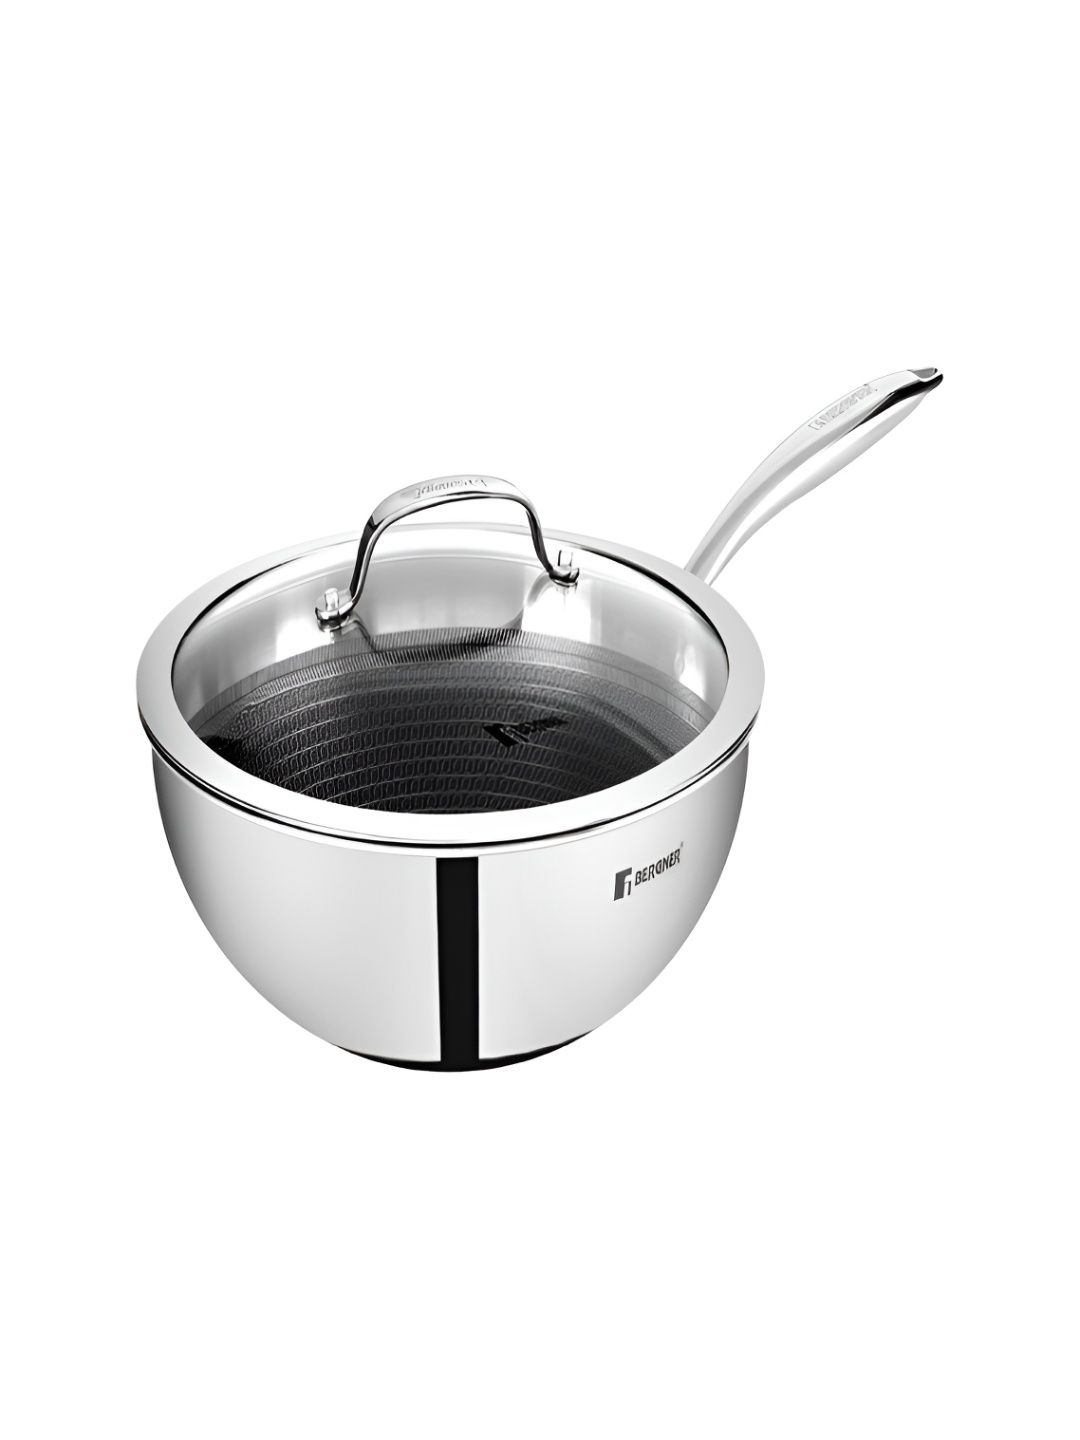 

Bergner Hitech TriPly Non-Stick 24 cm Induction Base Wok with Lid, 3.1 Litres Capacity, Silver